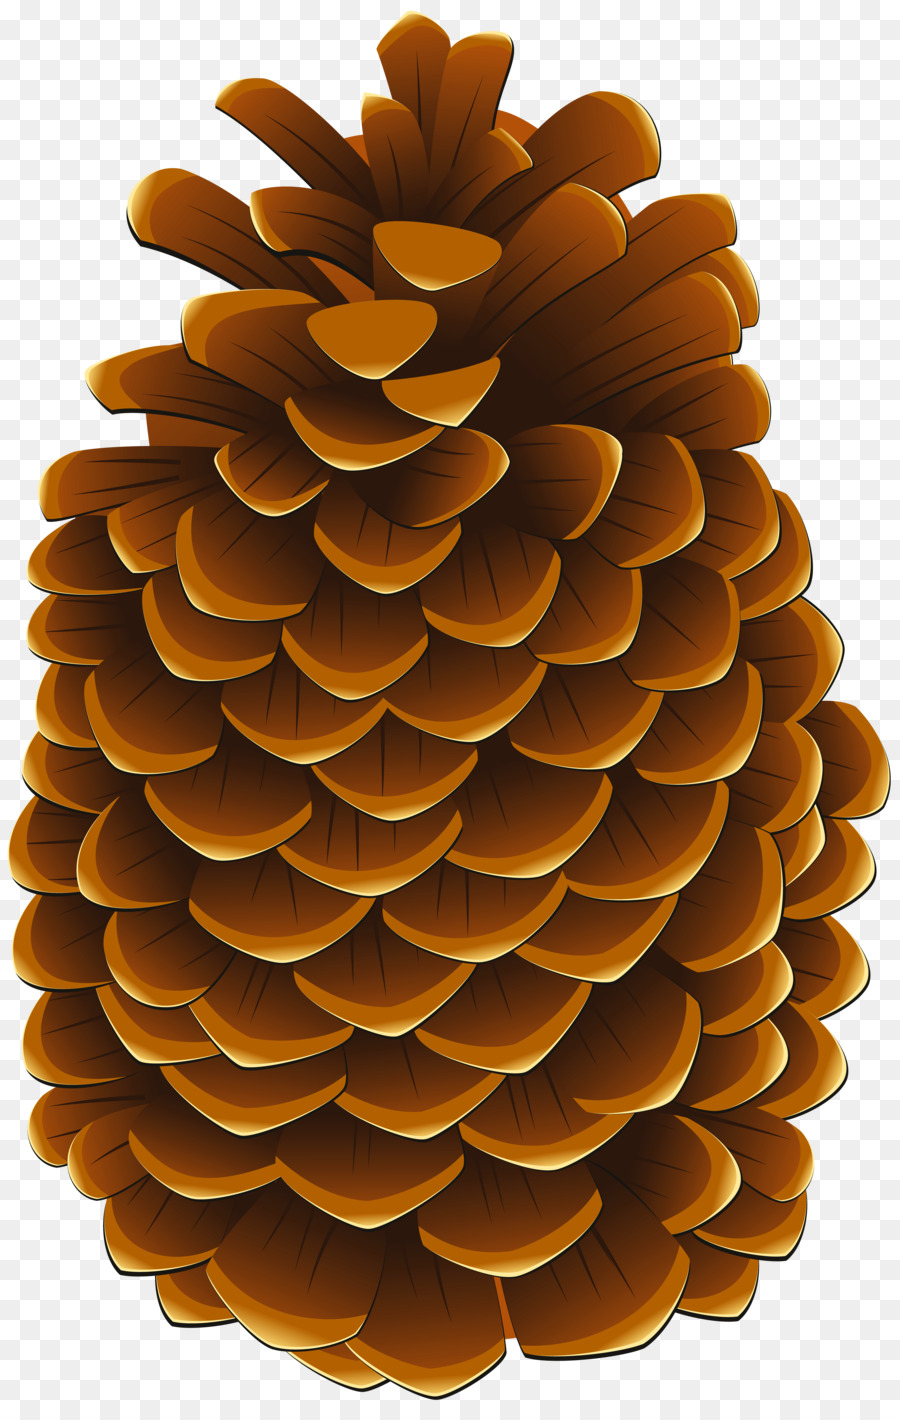 Clip art Conifer cone Portable Network Graphics Image Illustration - pinecones png download - 5120*8000 - Free Transparent Conifer Cone png Download.